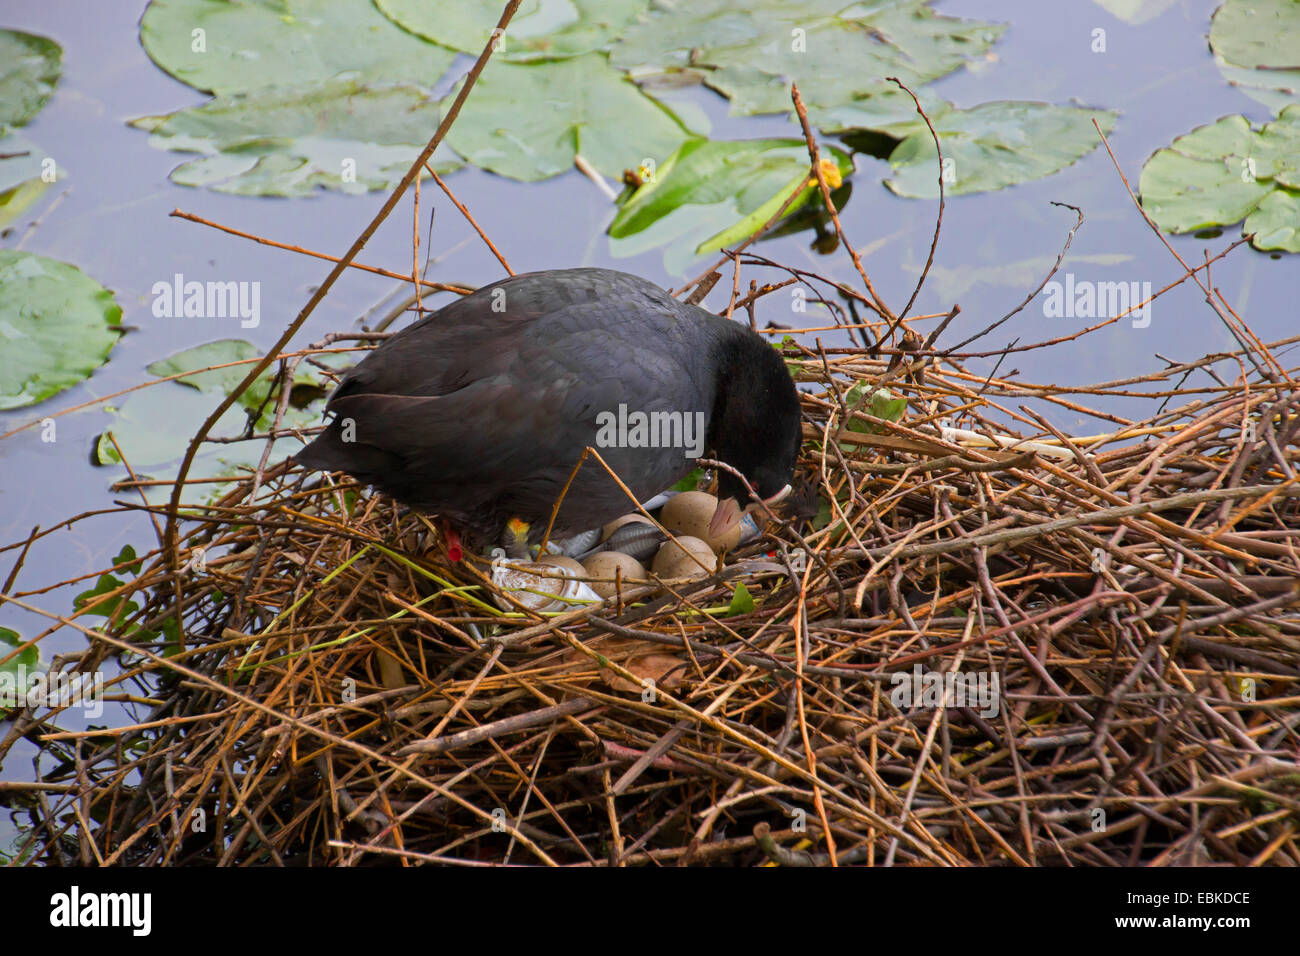 black coot (Fulica atra), in the nest with eggs and waste, Germany Stock Photo